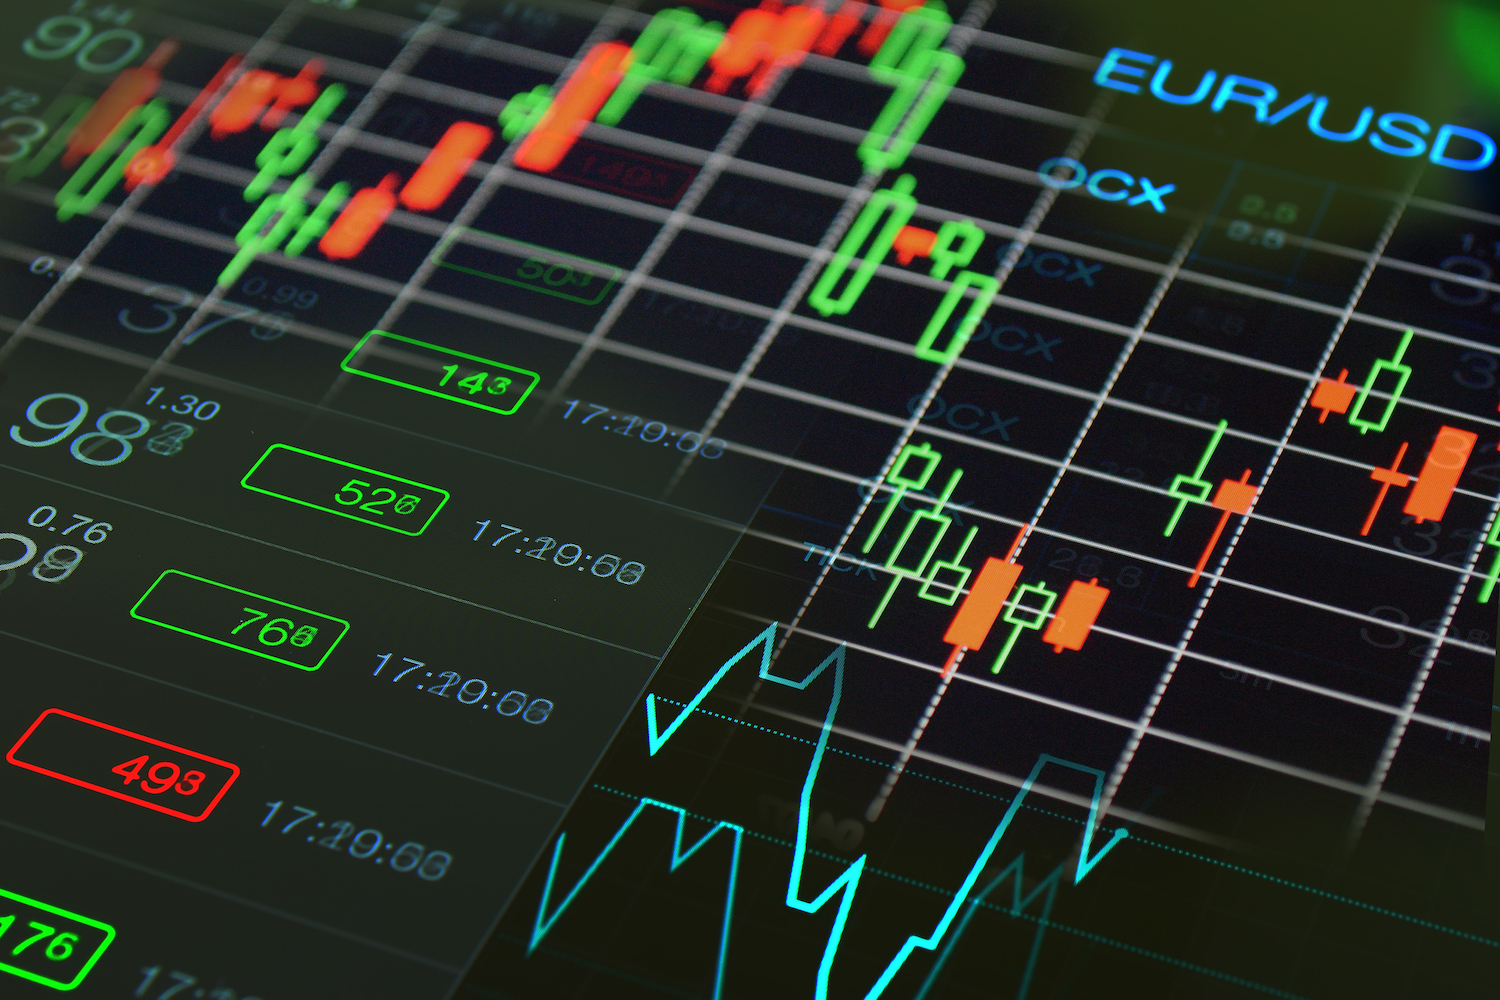 Exchange Traded Products For XRP, Litecoin Go Live For EU Investors